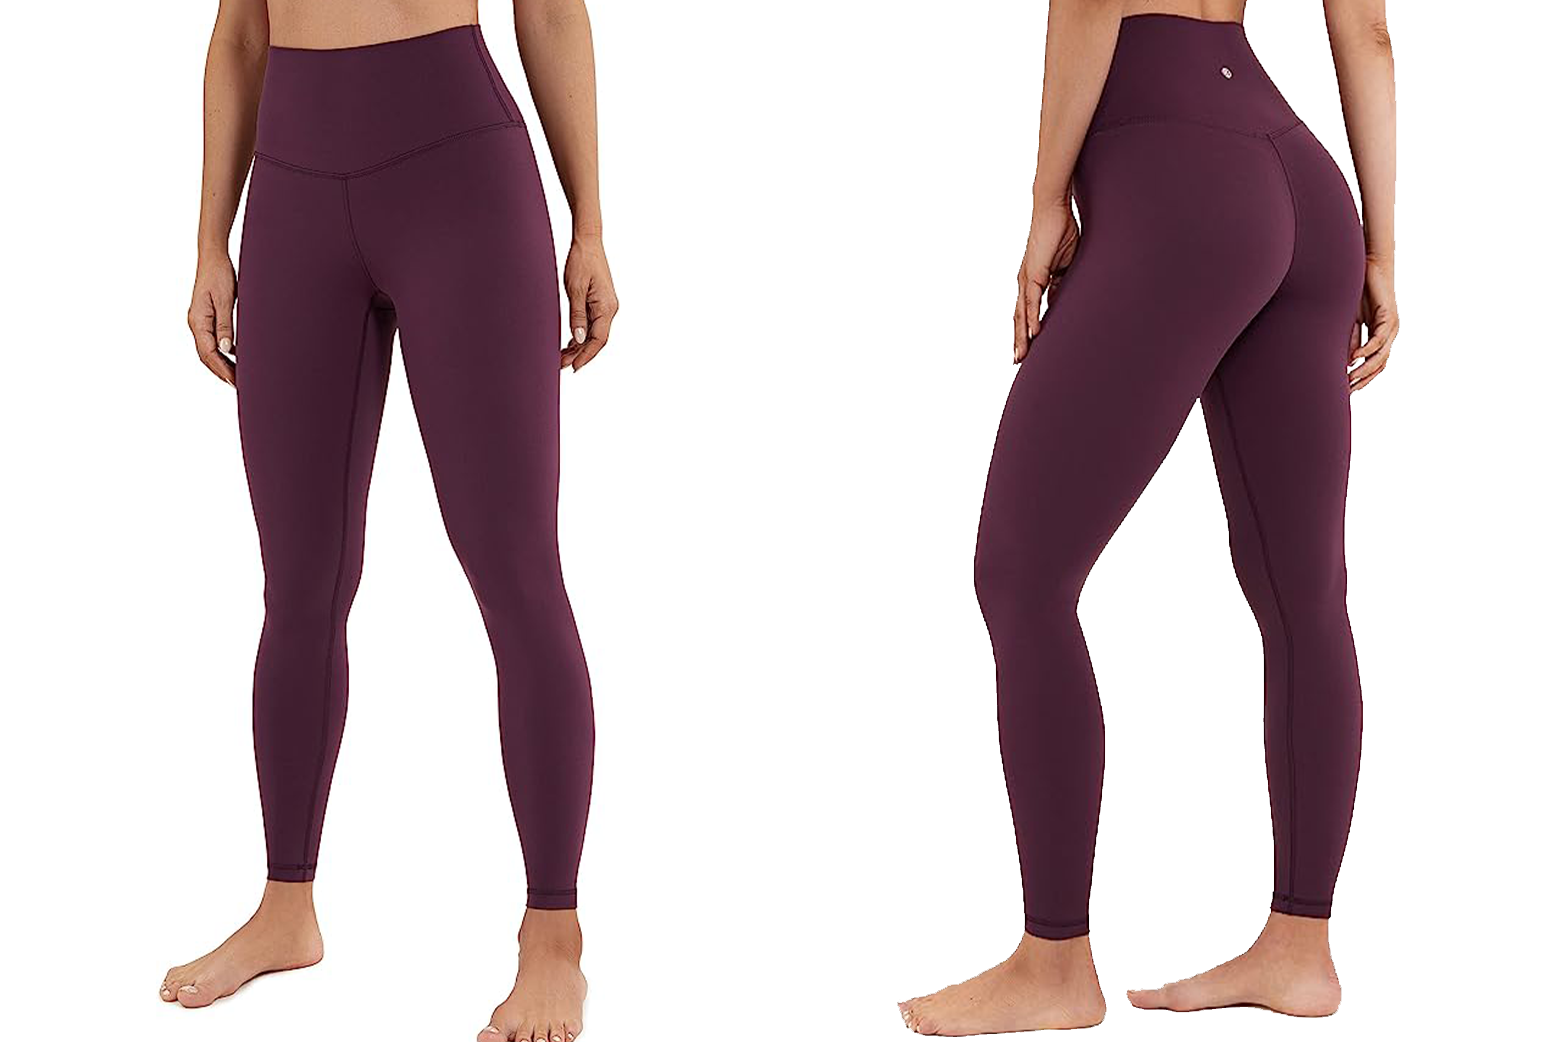 CRZ YOGA Butterluxe High-Waisted Lounge Legging modeled by a female front and back